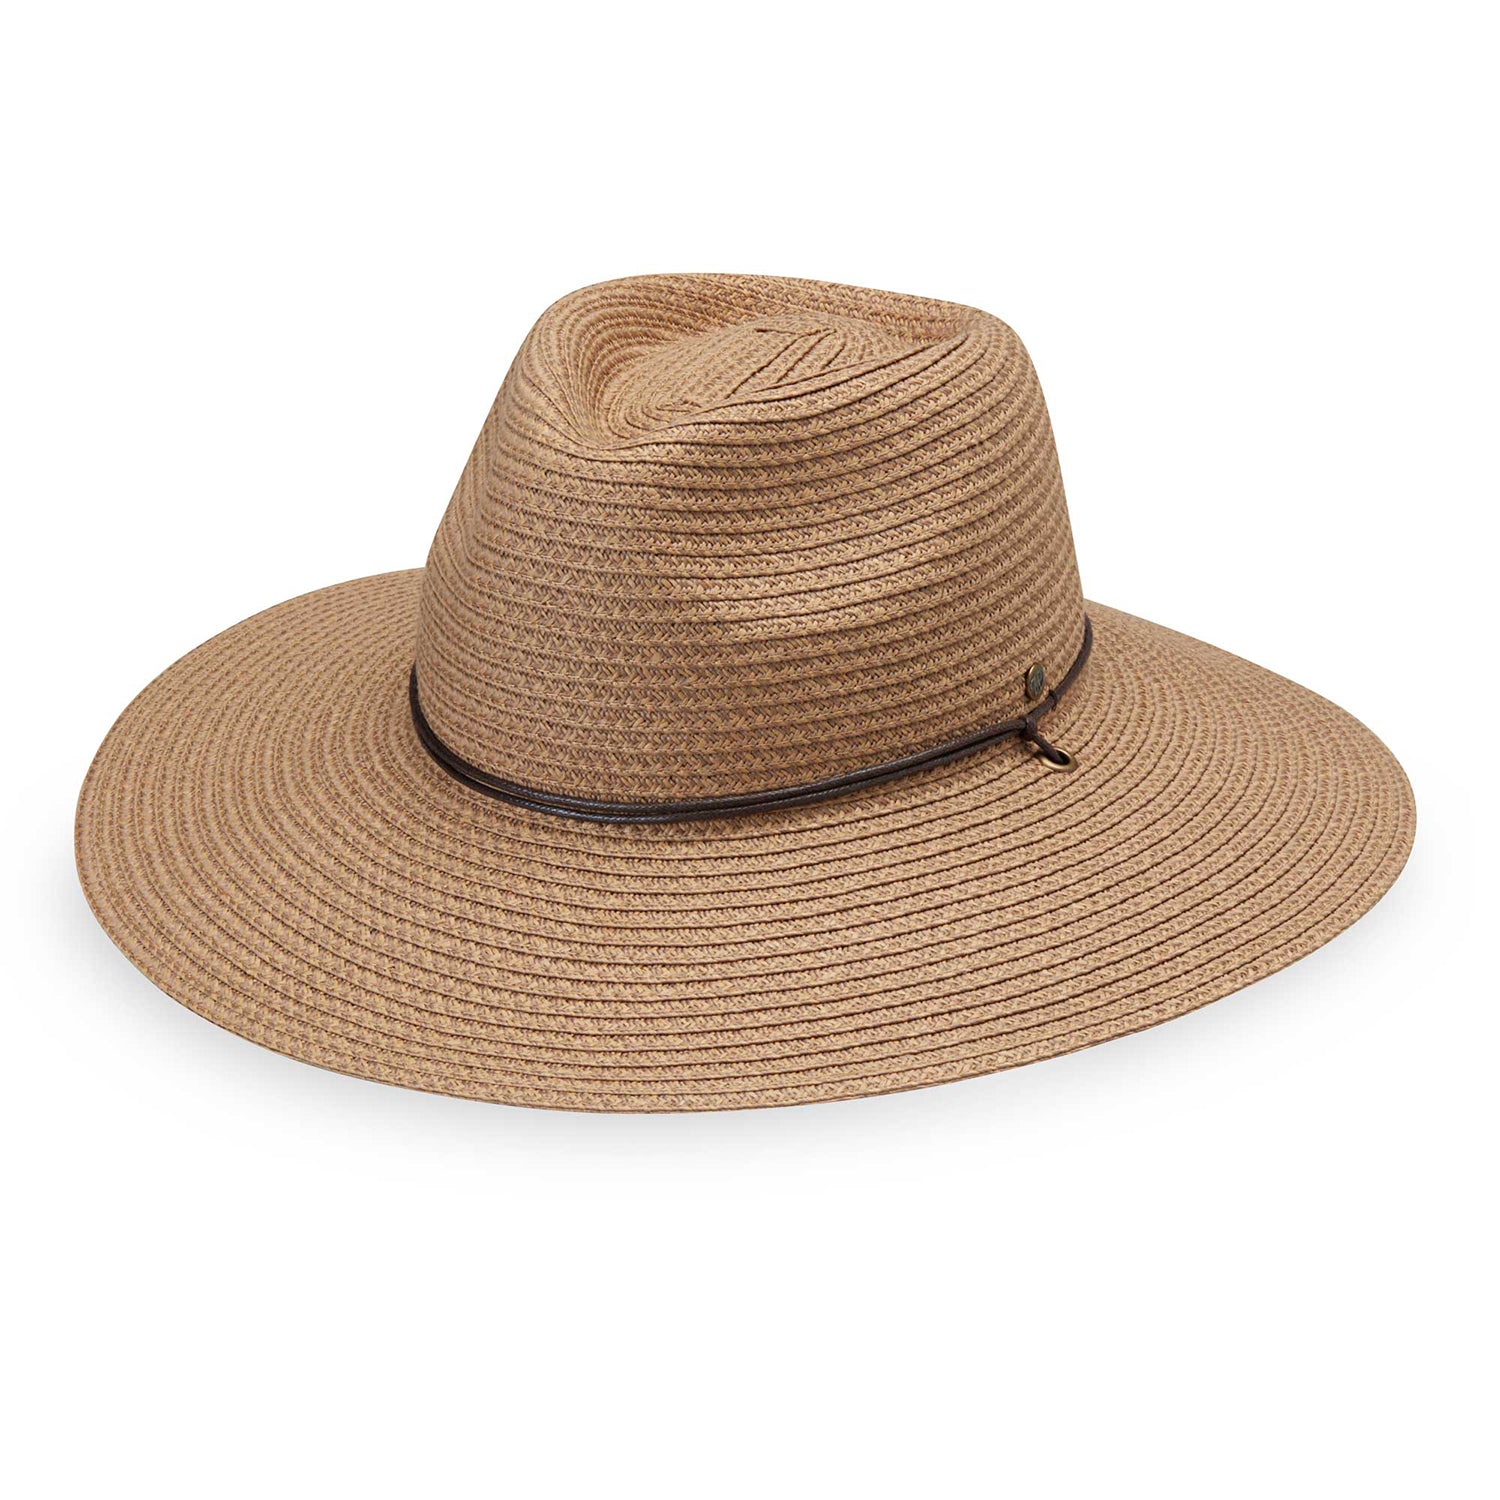 Featuring Petite Sanibel with a wide brim and fedora crown with UPF 50 rating from Wallaroo